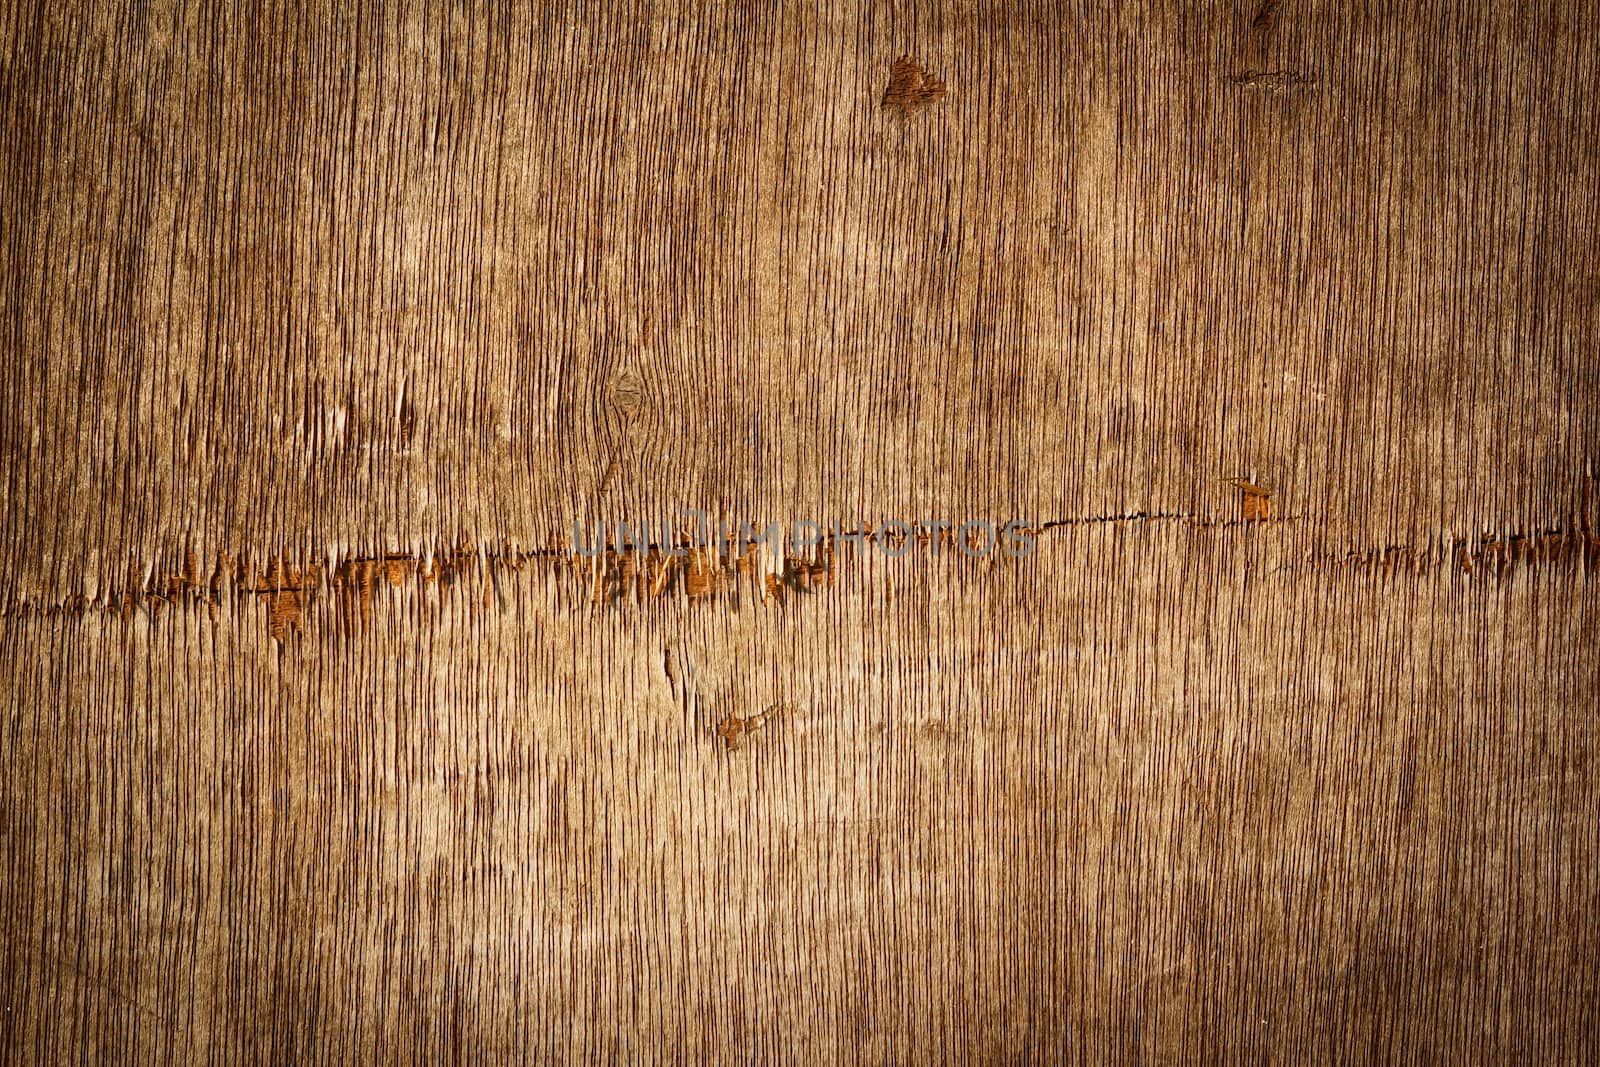 cracked wood board background  by vitawin